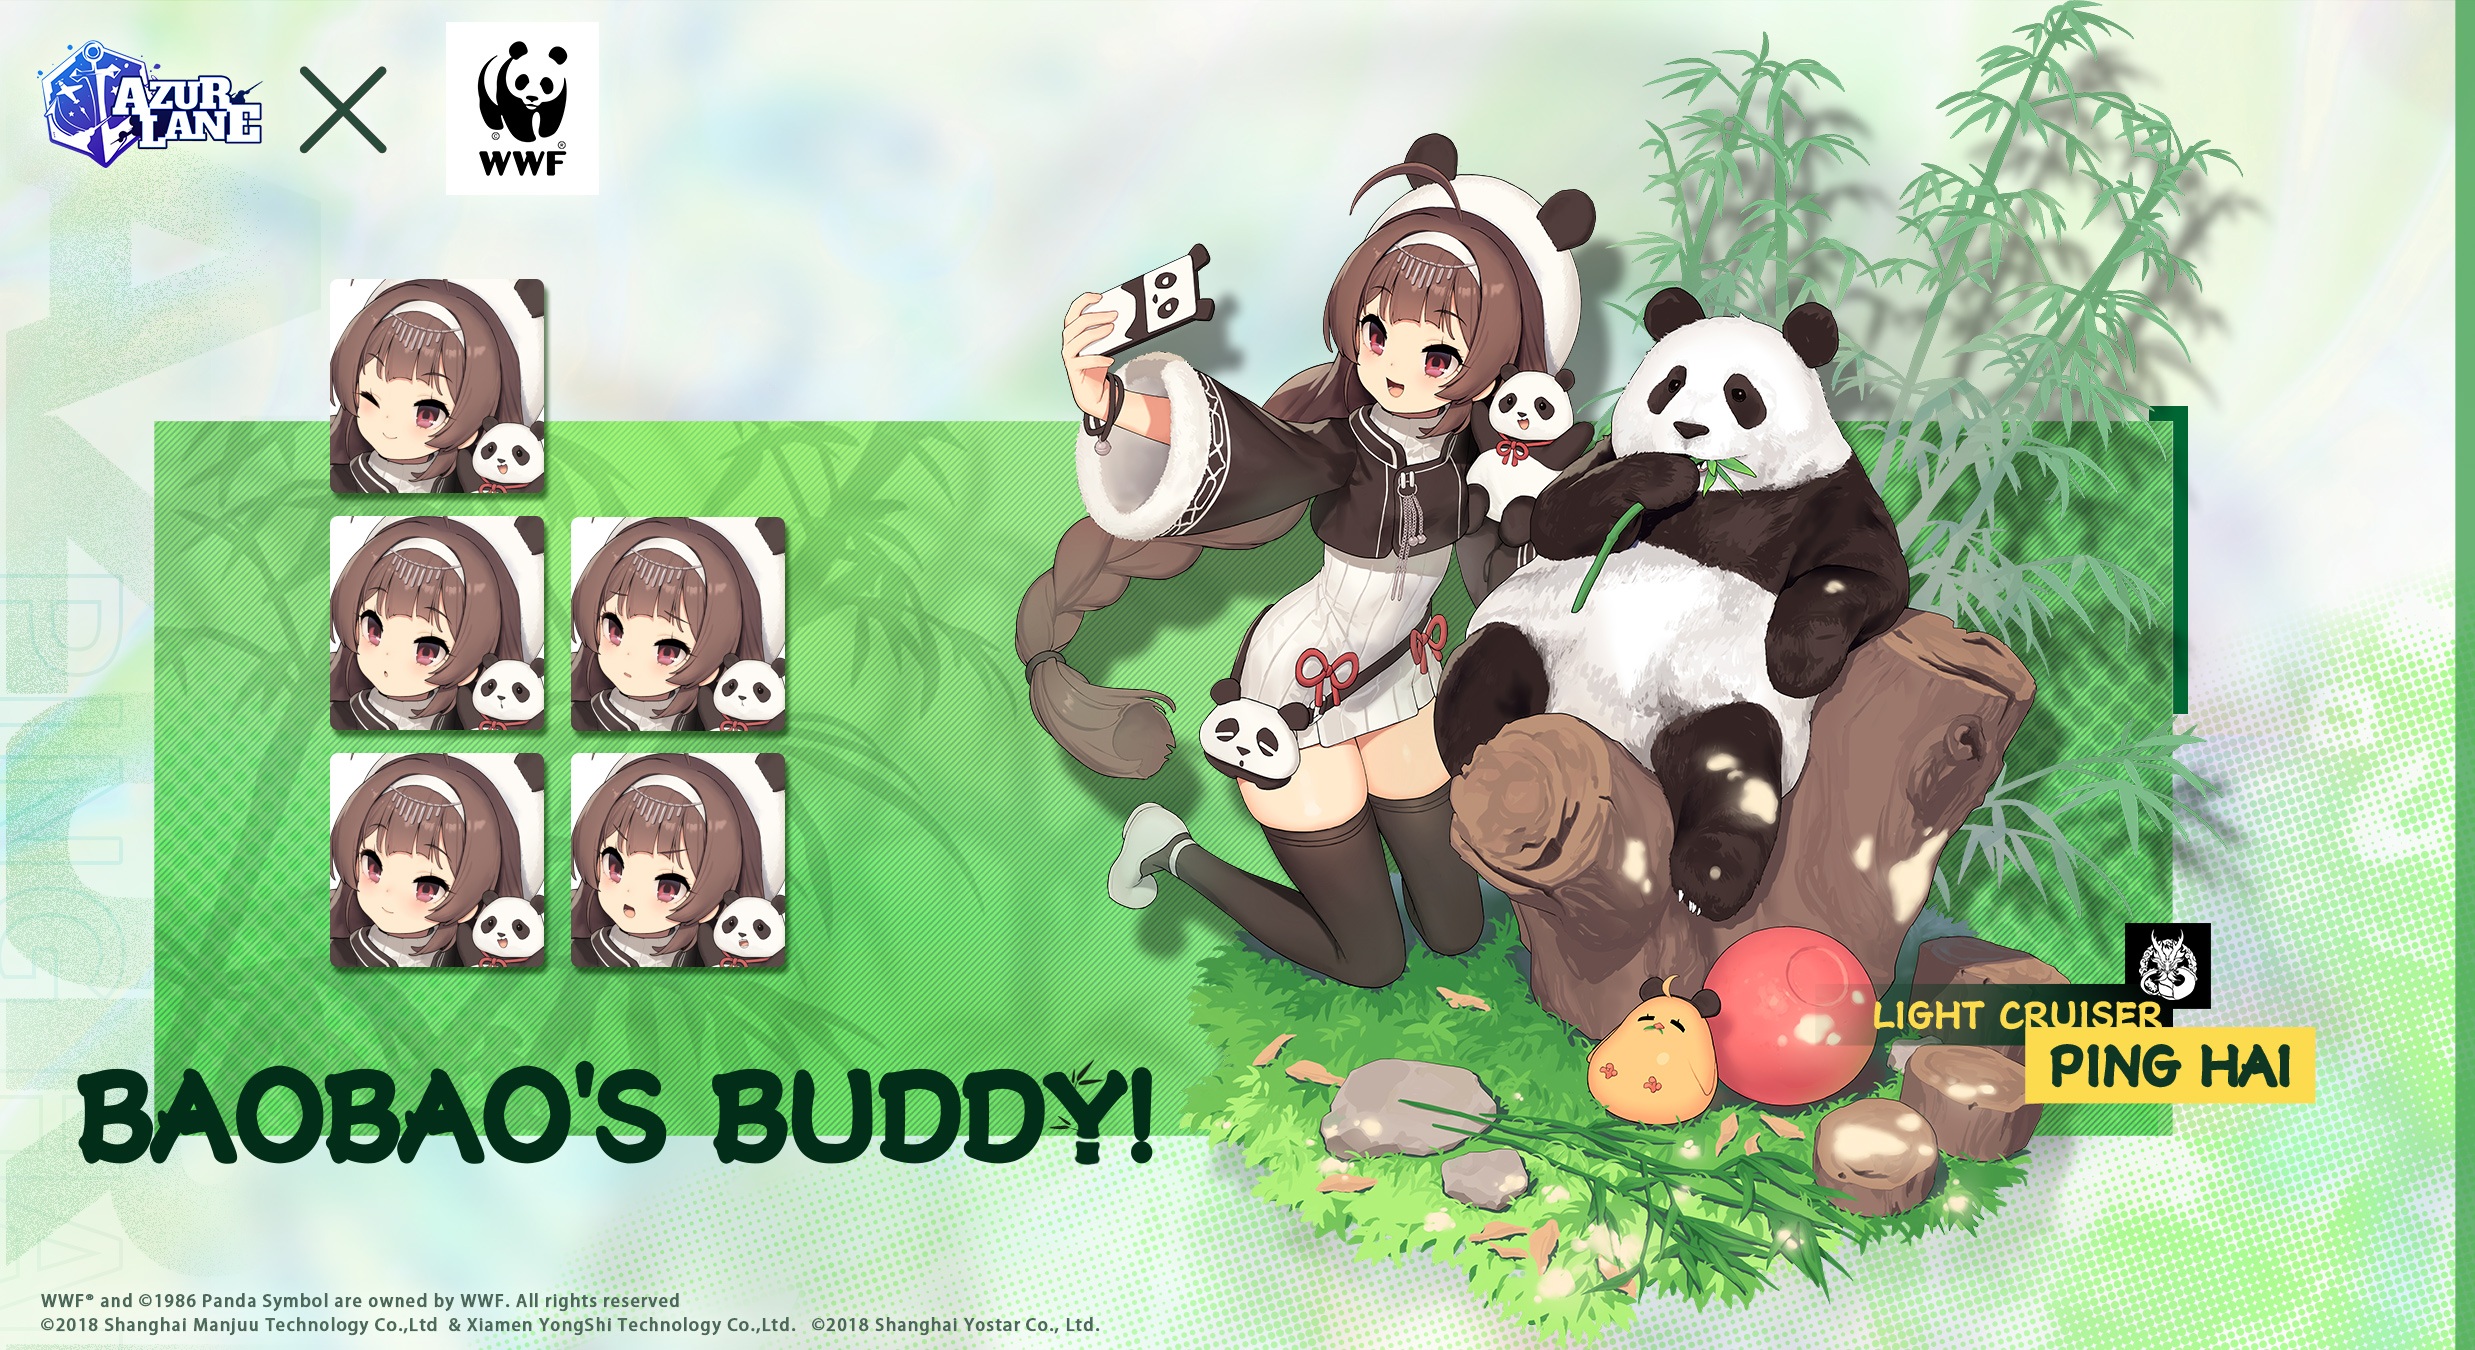 Azur Lane March Update: Here comes the Cutest Companions, Panda Ping Hai and Ning Hai